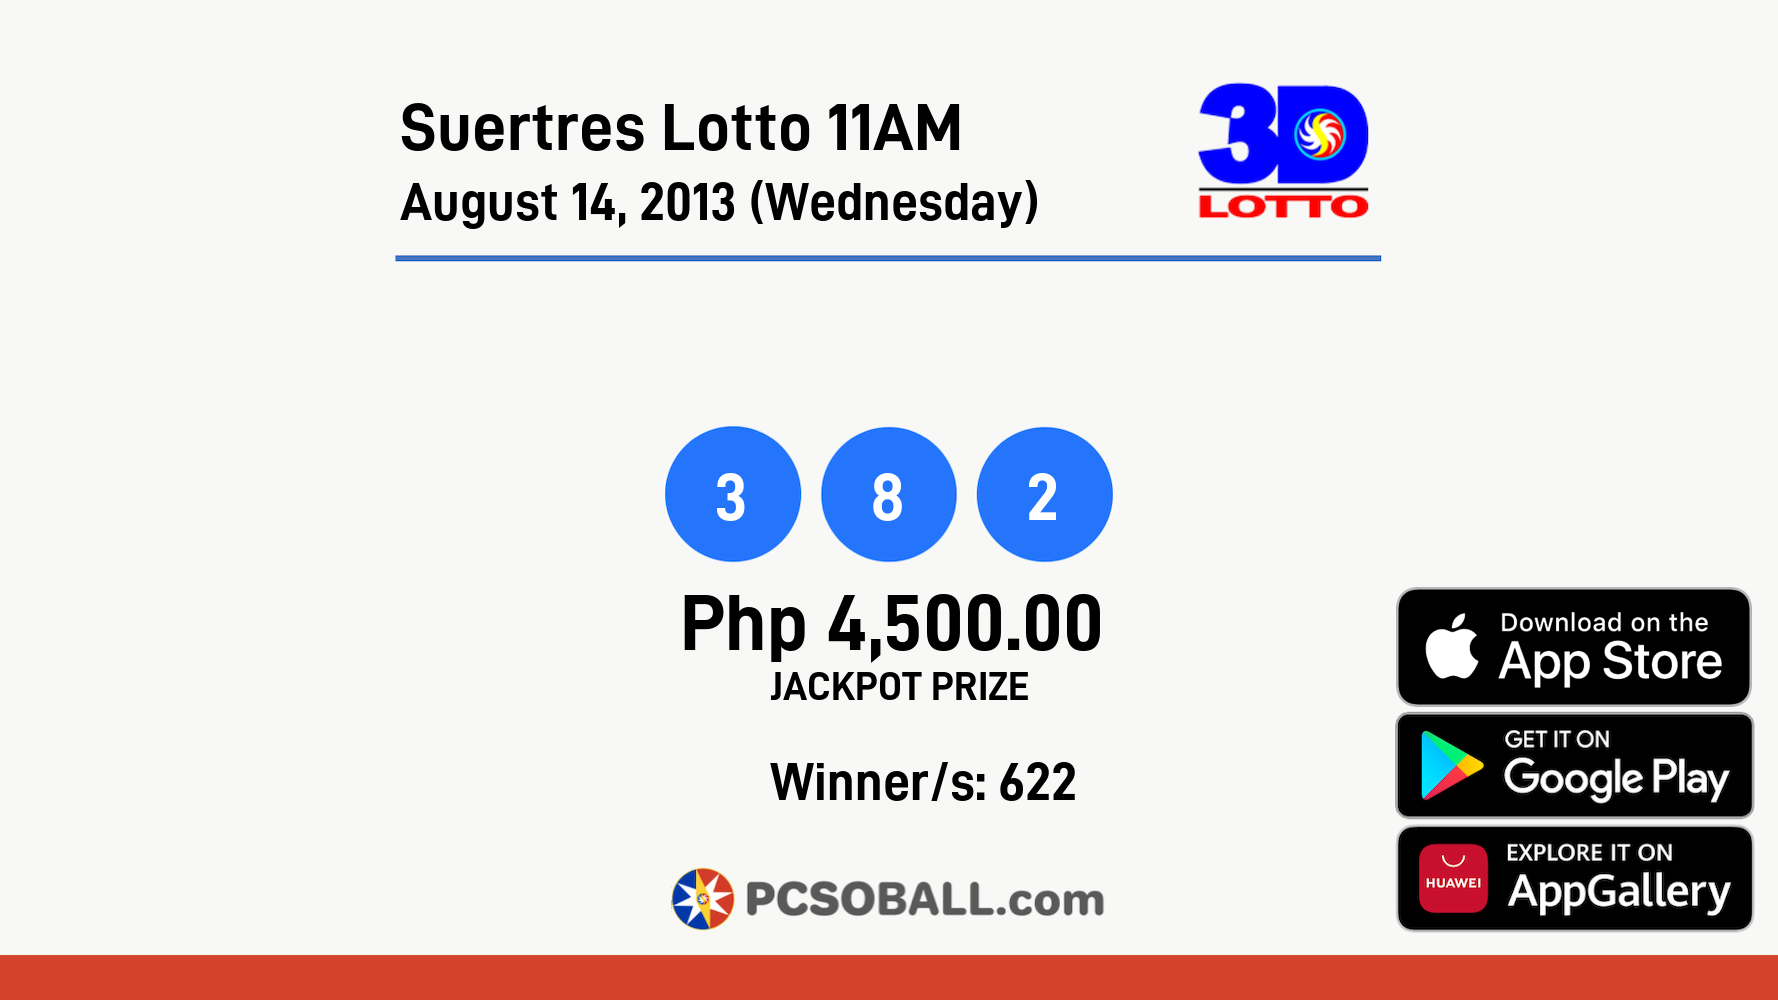 Suertres Lotto 11AM August 14, 2013 (Wednesday) Result